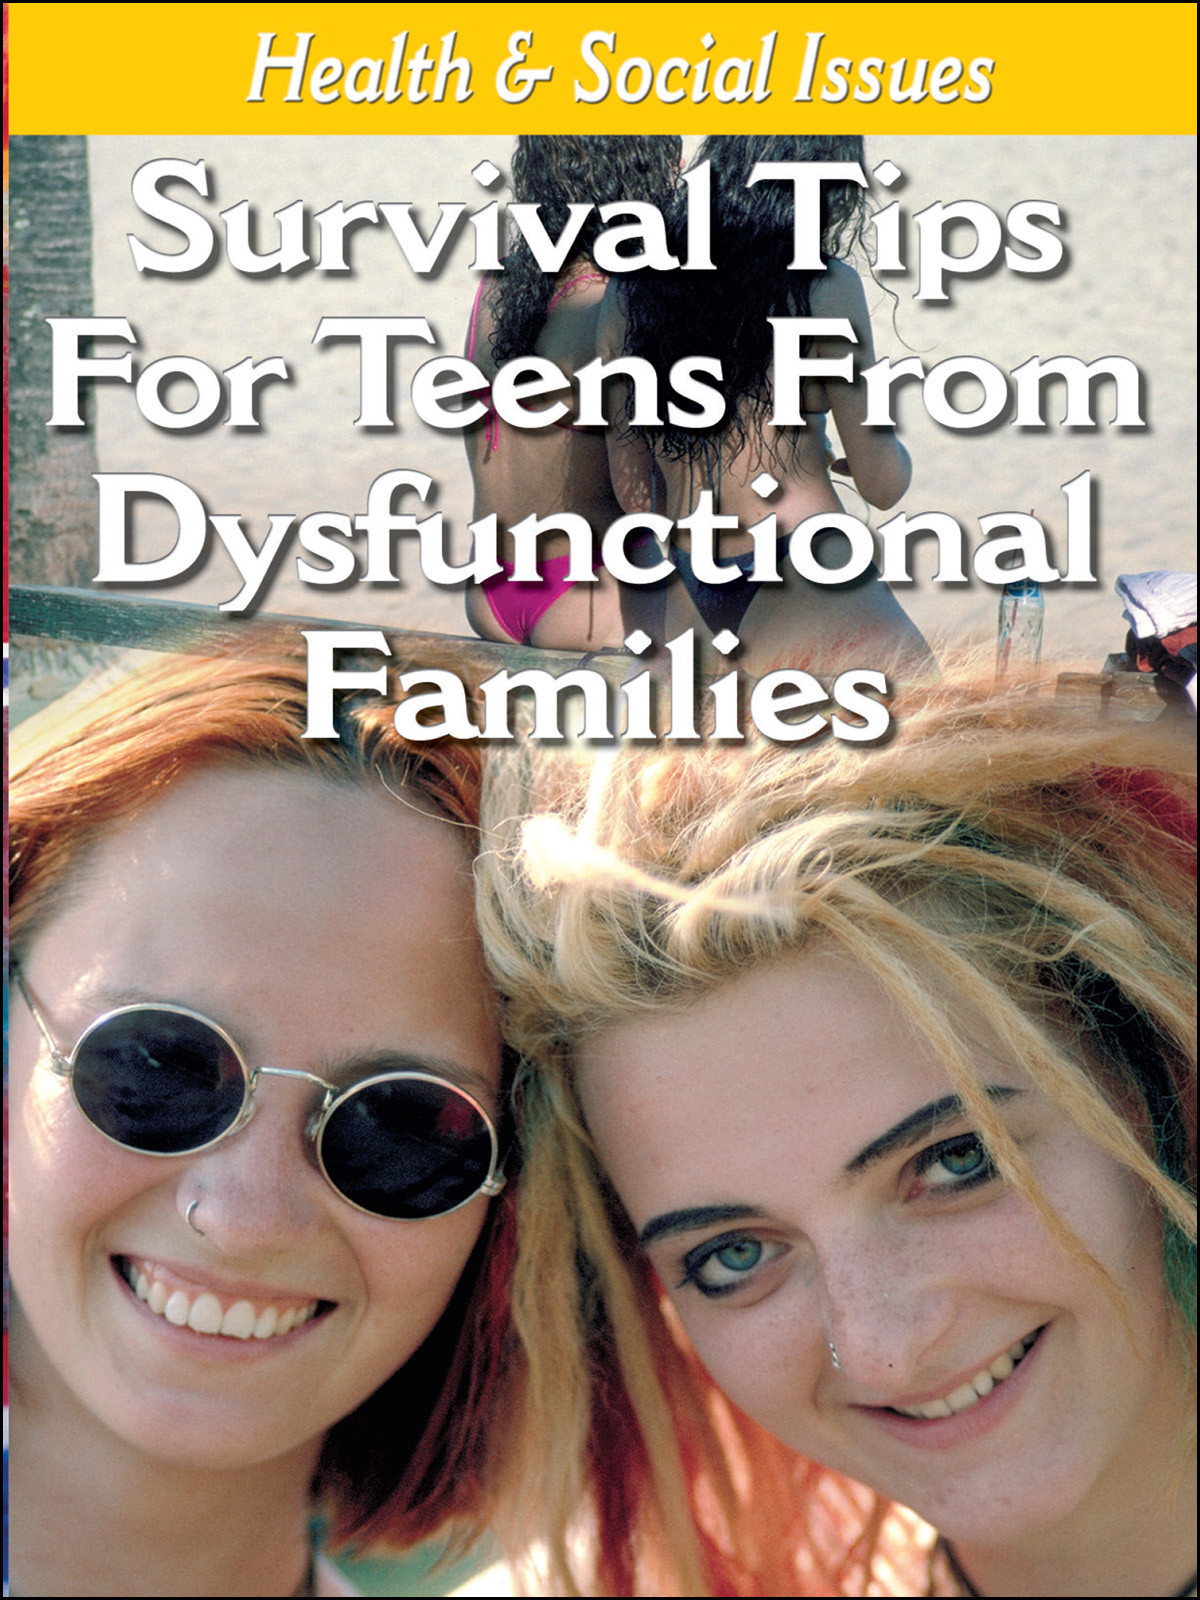 L922 - Survival Tips For Teens Living in Dysfunctional Families